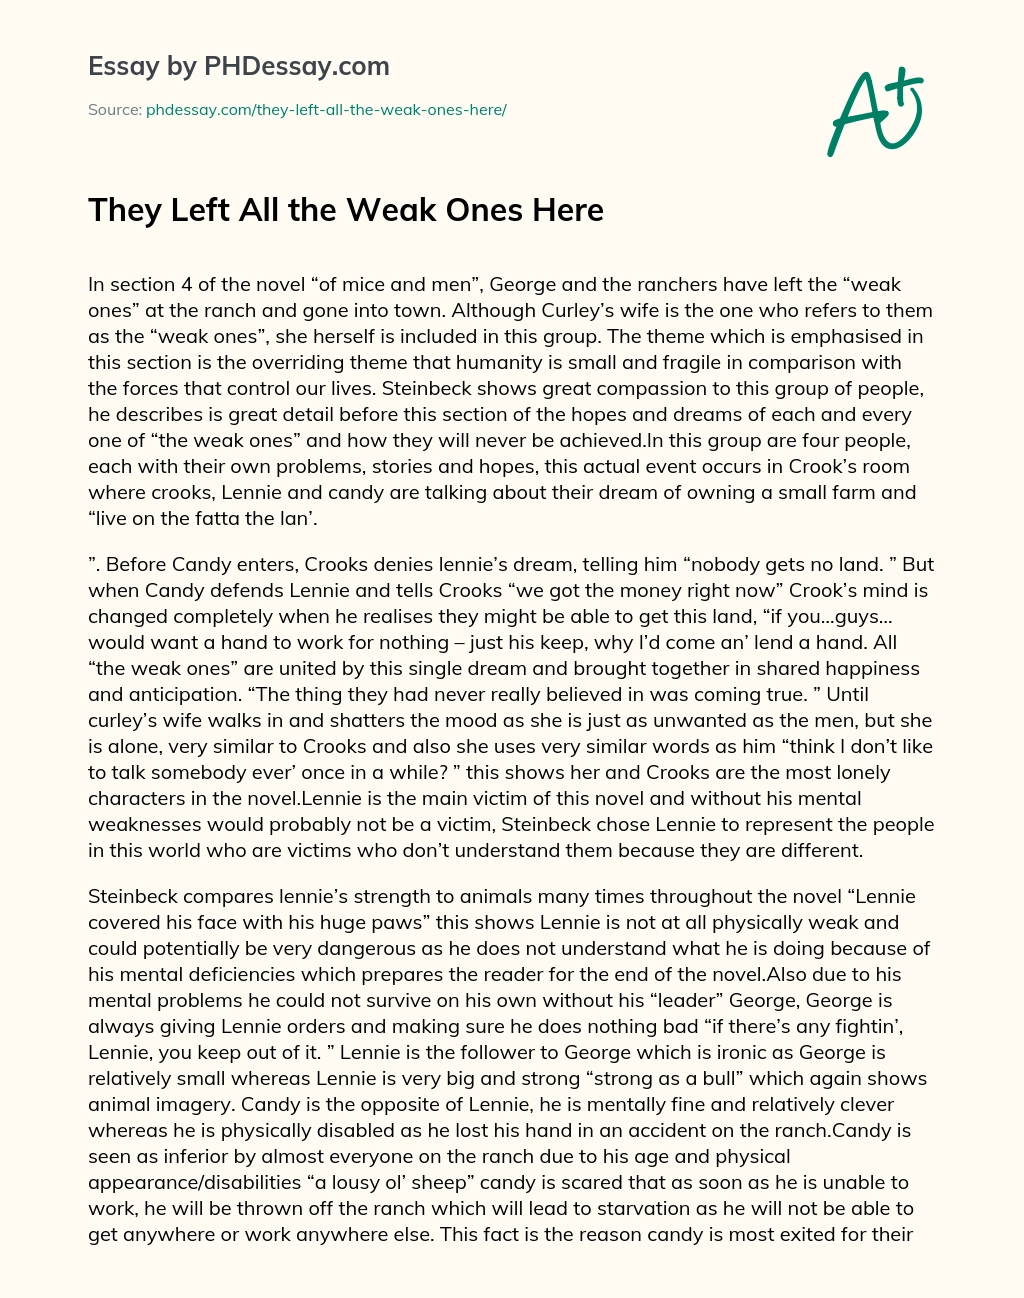 They Left All the Weak Ones Here essay